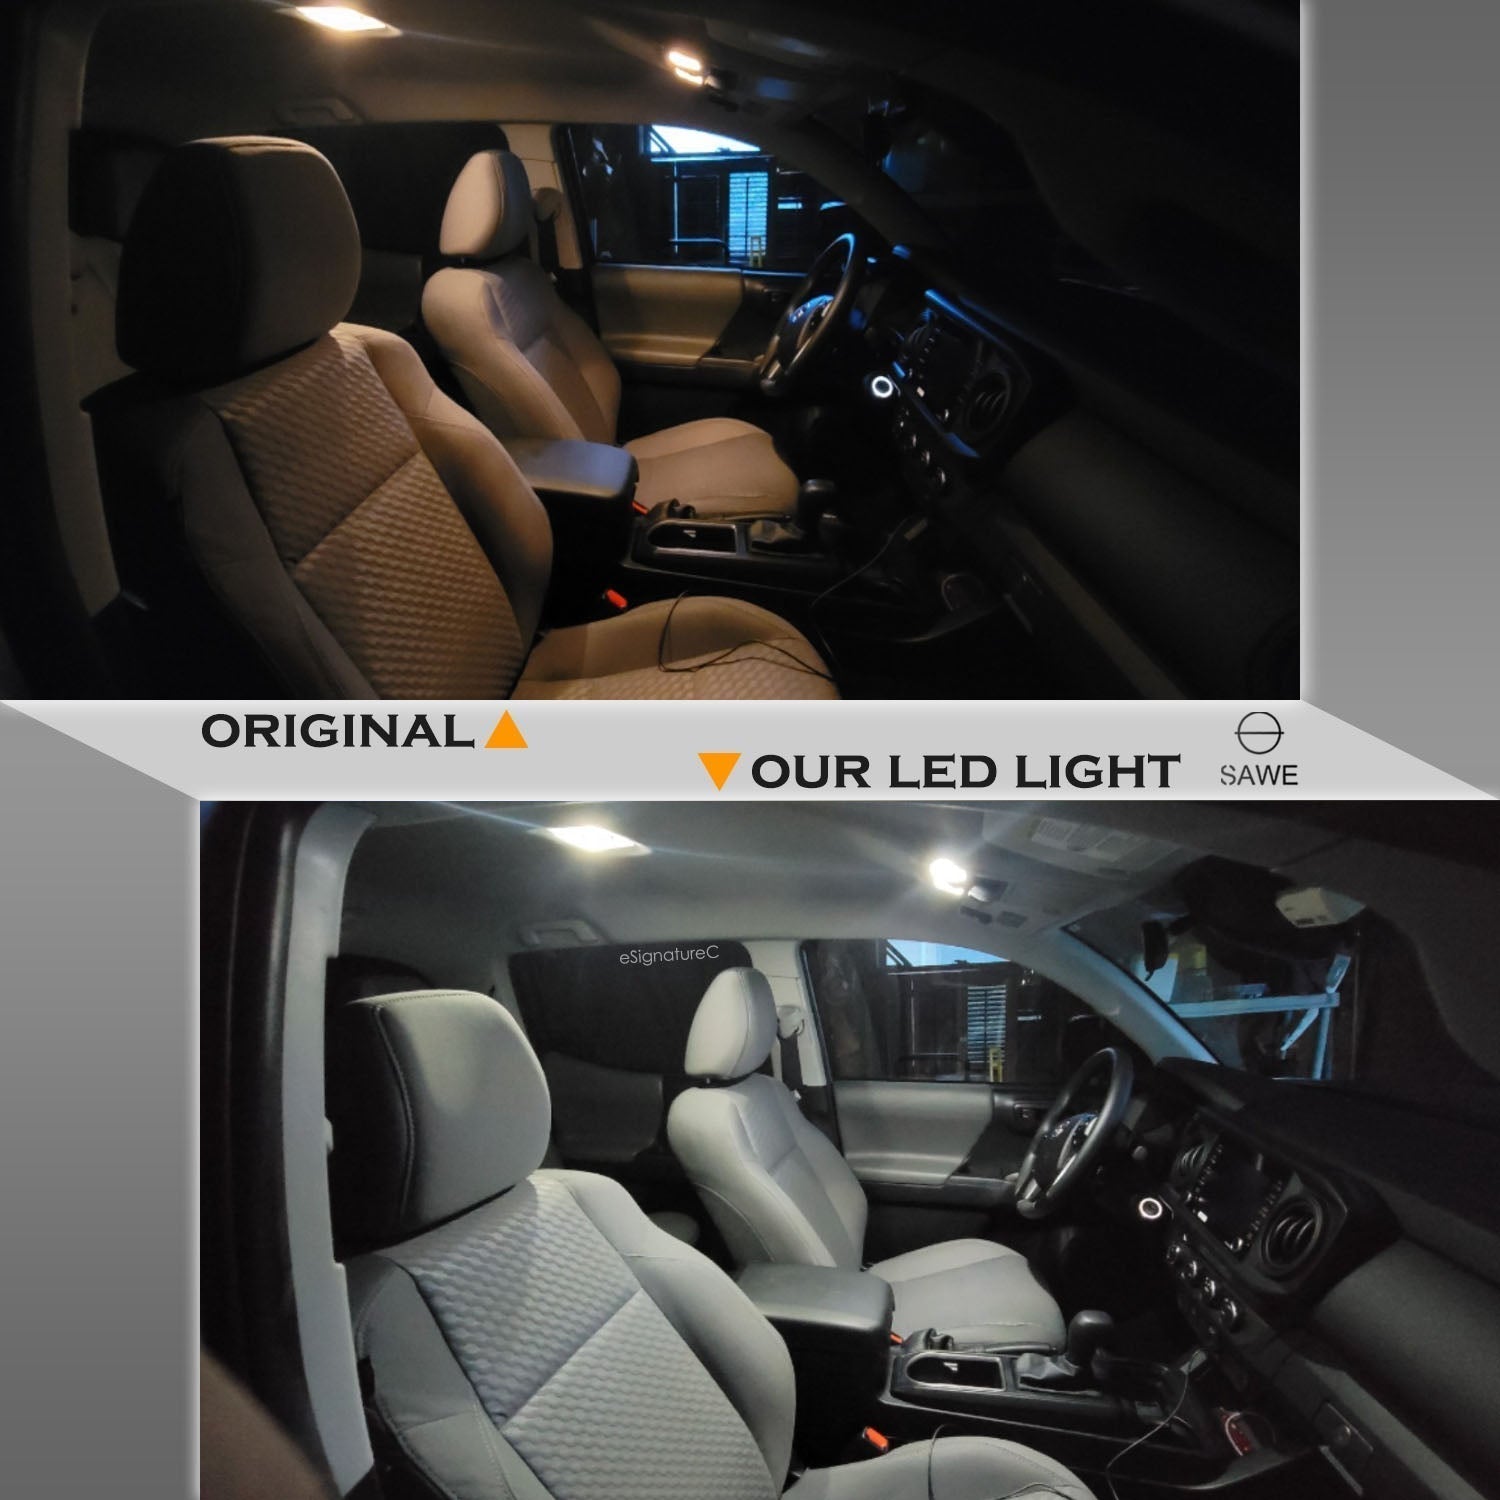 For Nissan Quest Interior LED Lights - Dome & Map Light Bulbs Package Kit for 1999 - 2002 - White